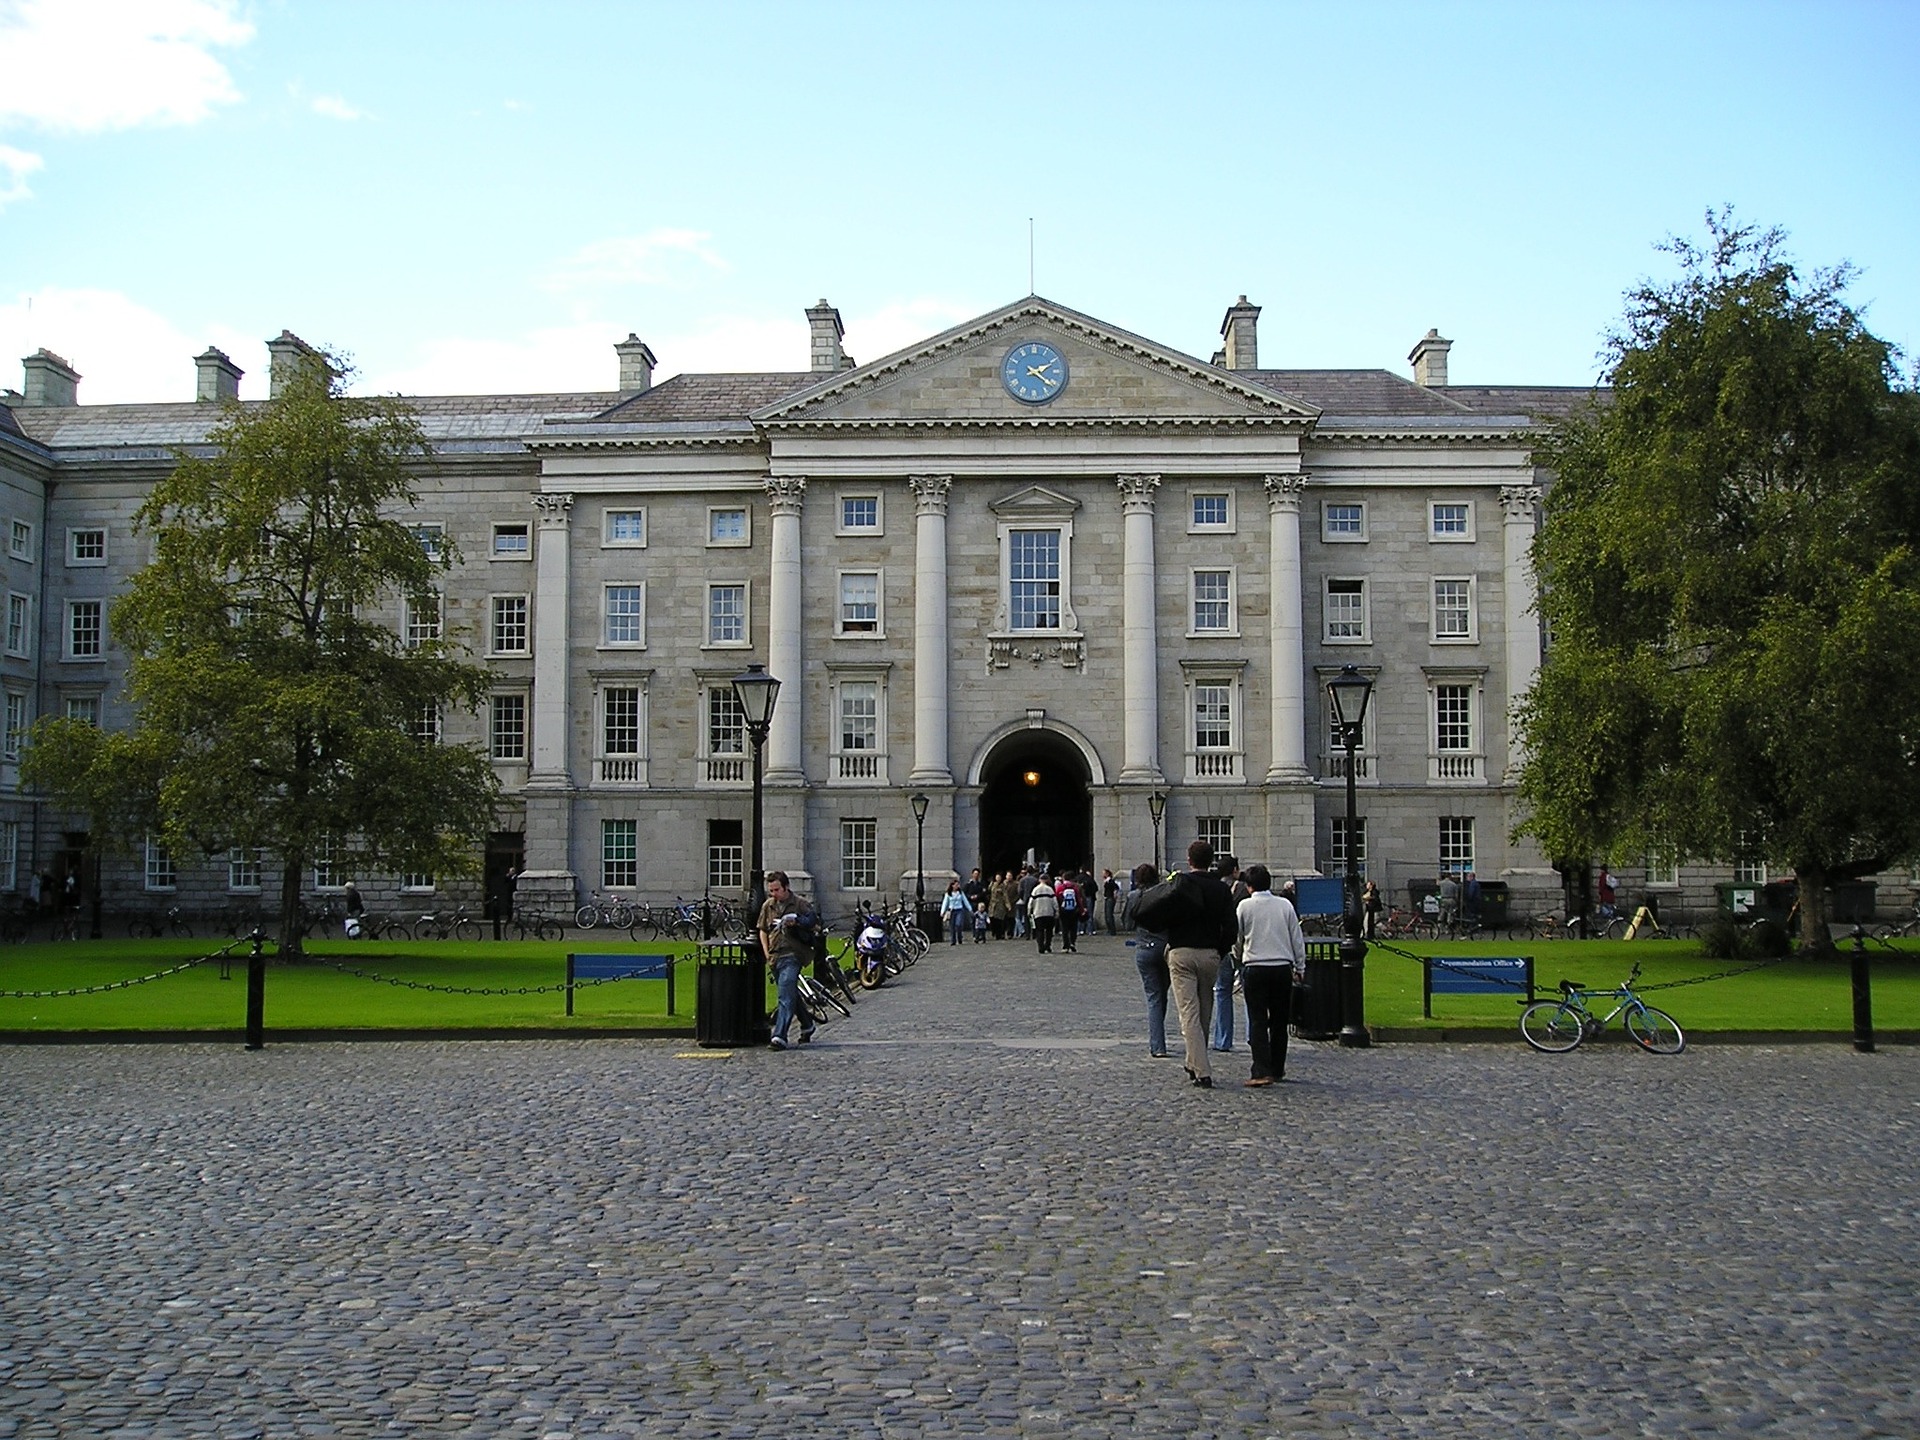 Welcome to Trinity College